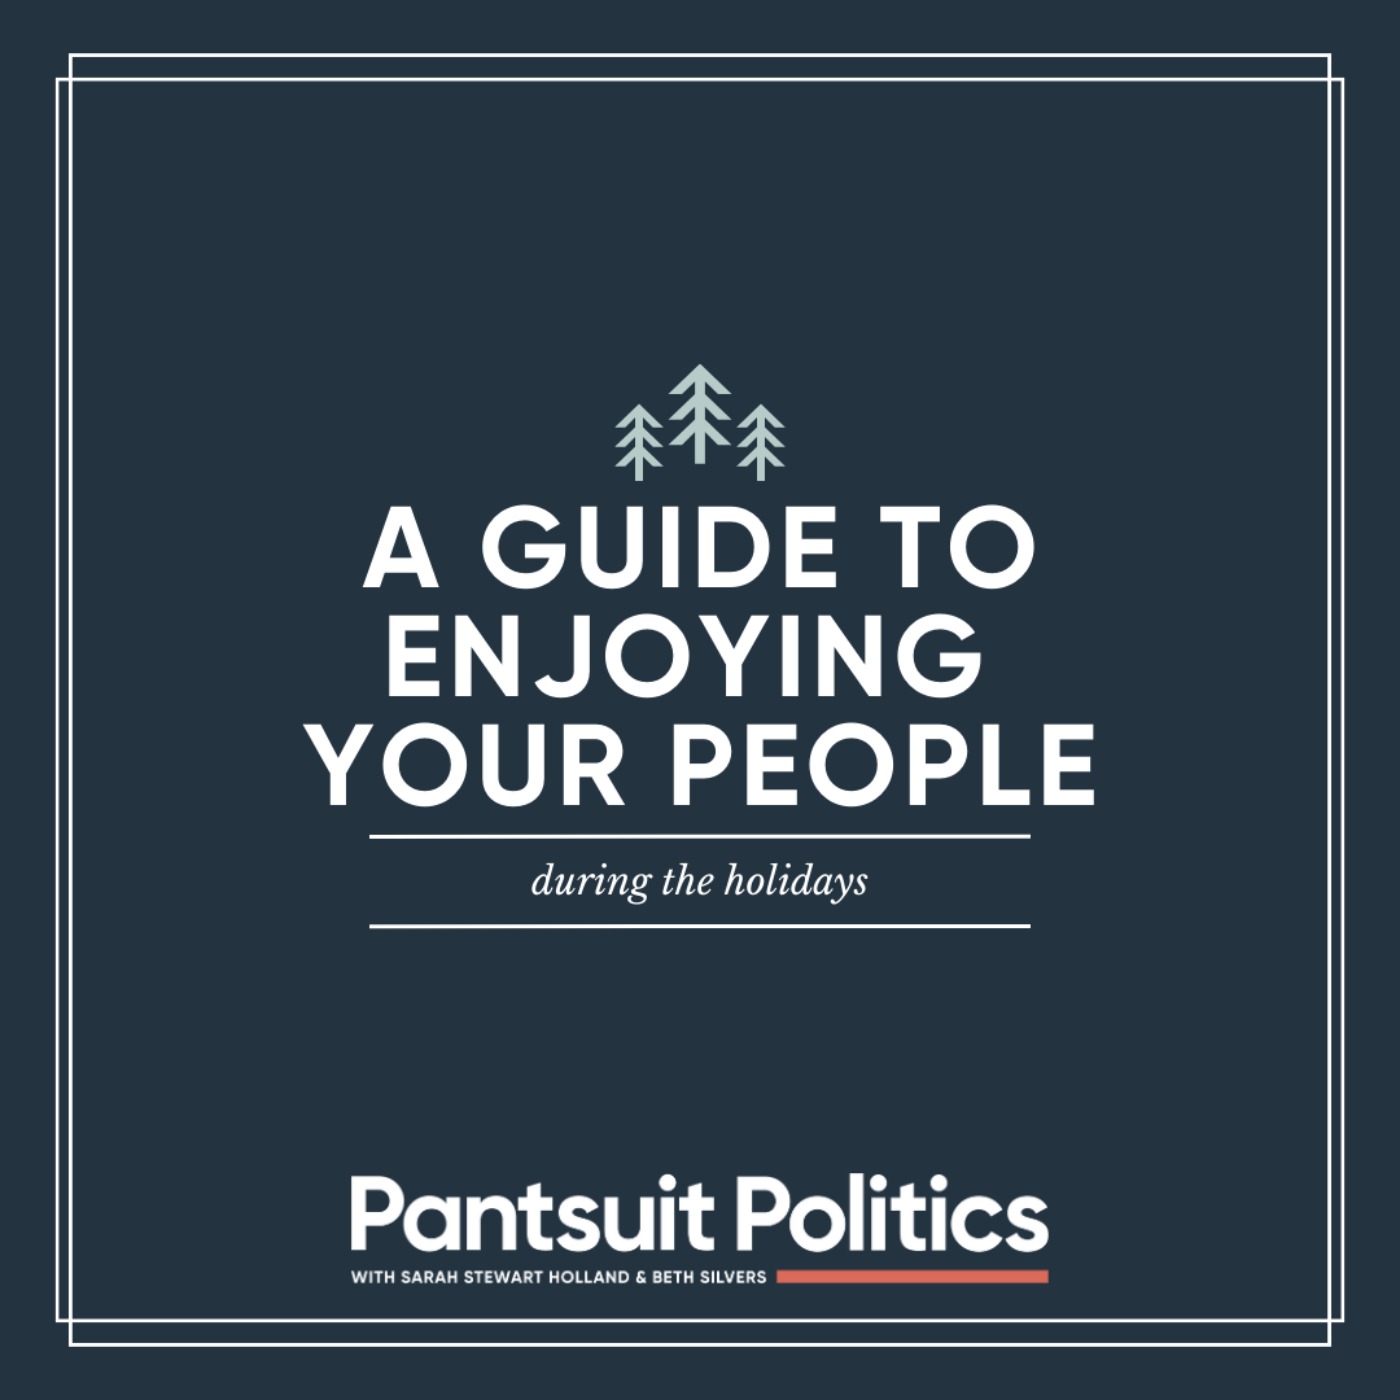 A Guide to Enjoying Your People